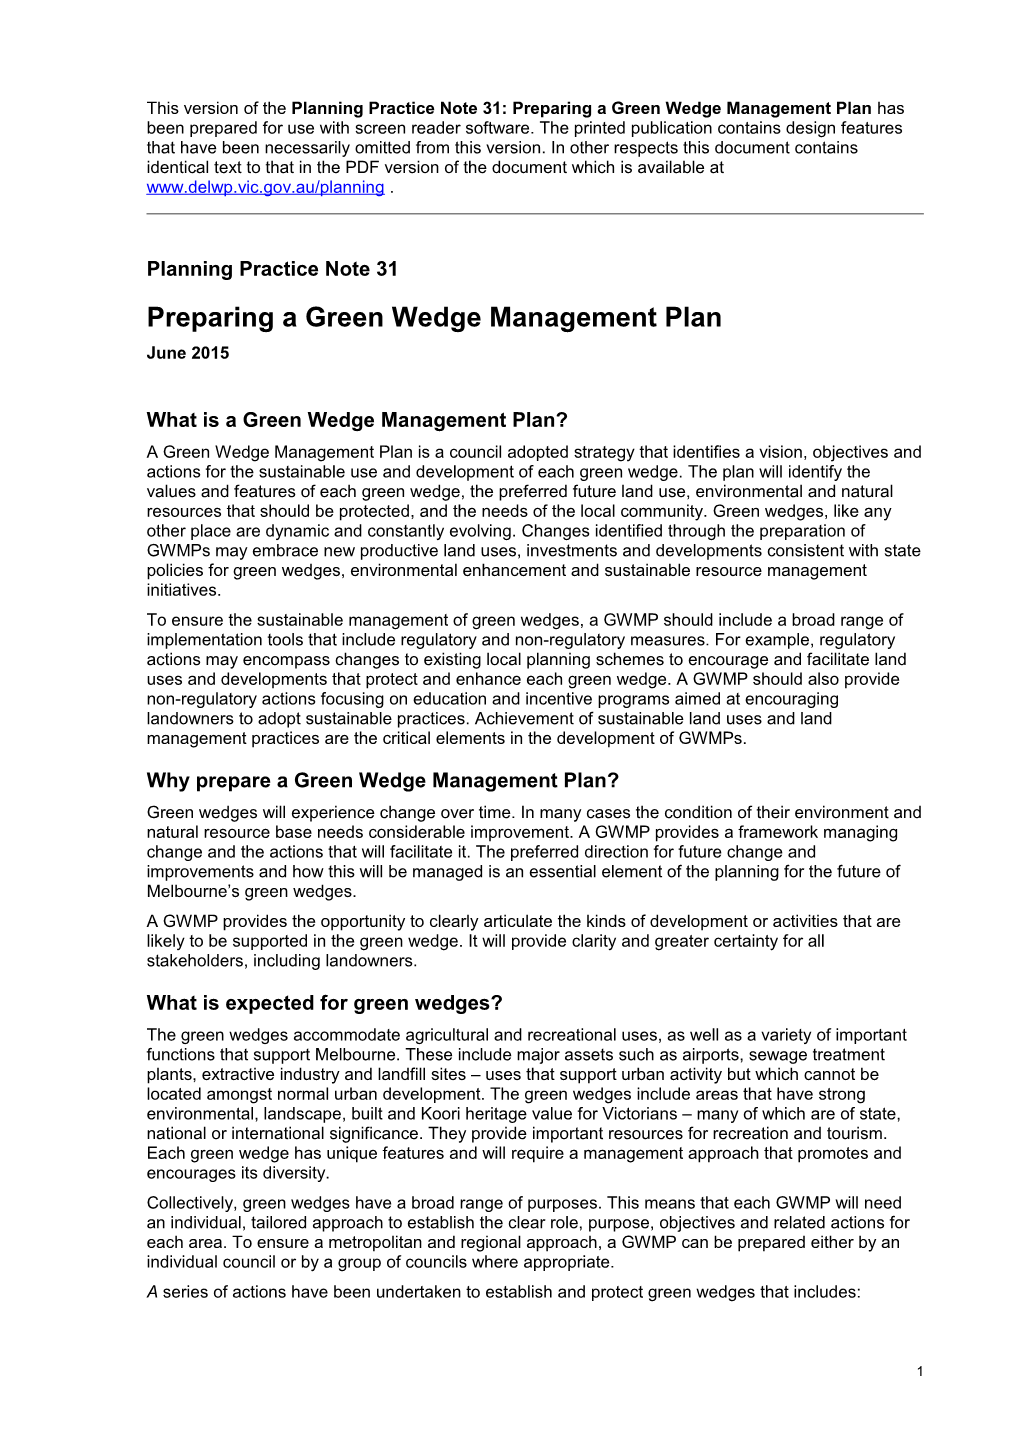 Planning Practice Note 31: Preparing a Green Wedge Management Plan